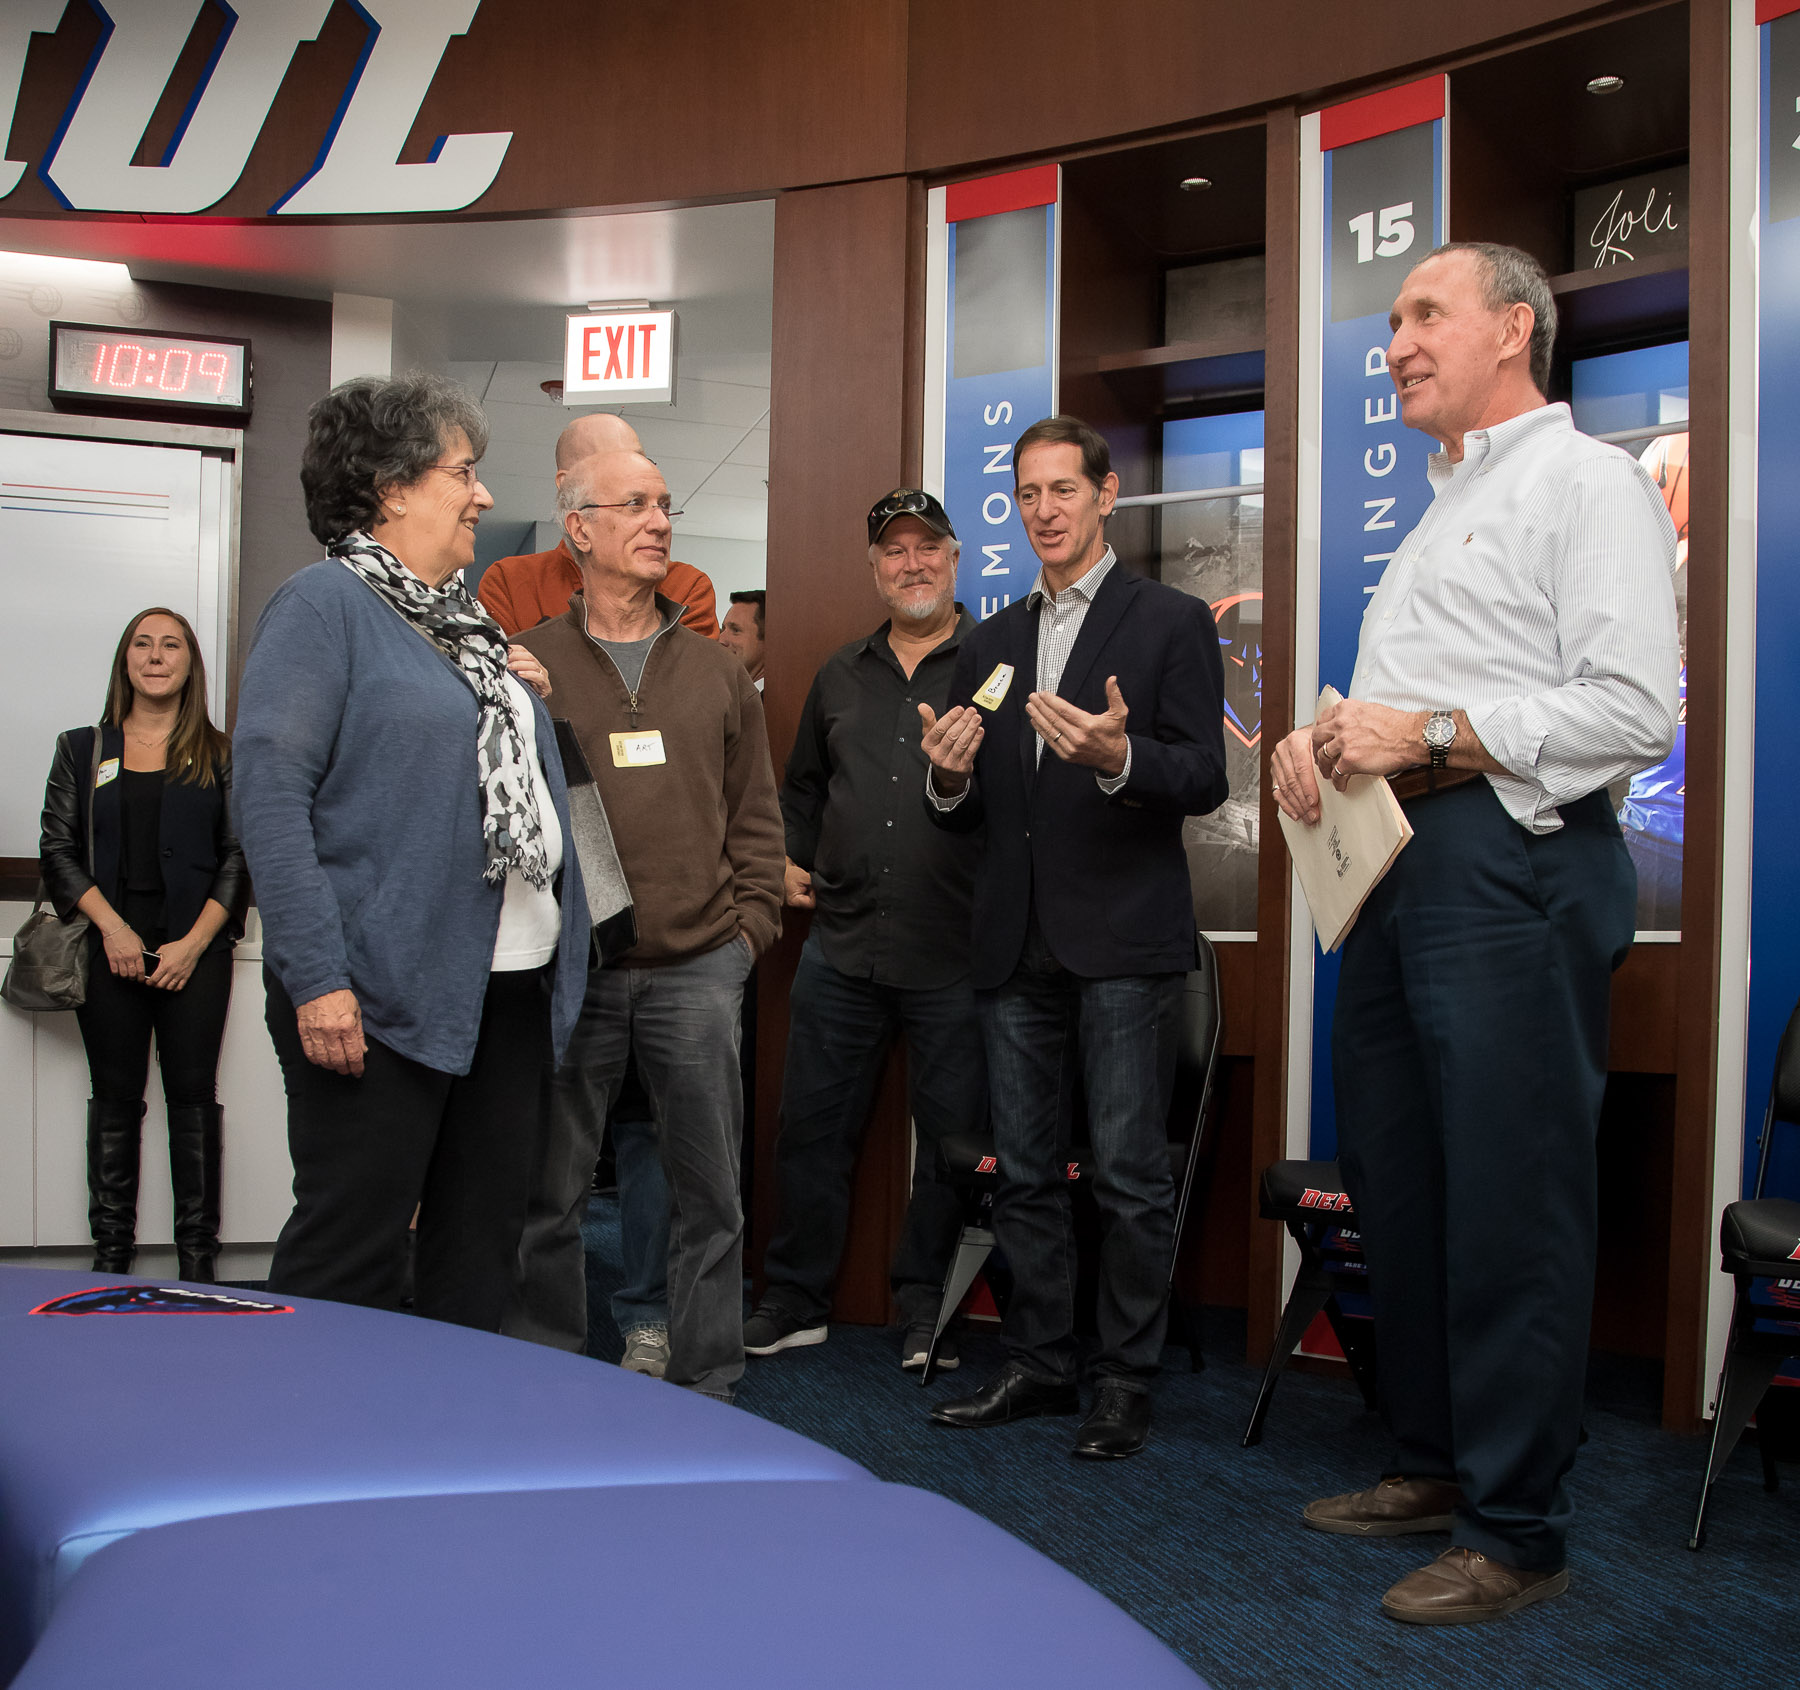 Bob Janis, vice president of facility operations, far right, answers questions about the women's basketball locker room. (DePaul University/Jeff Carrion)